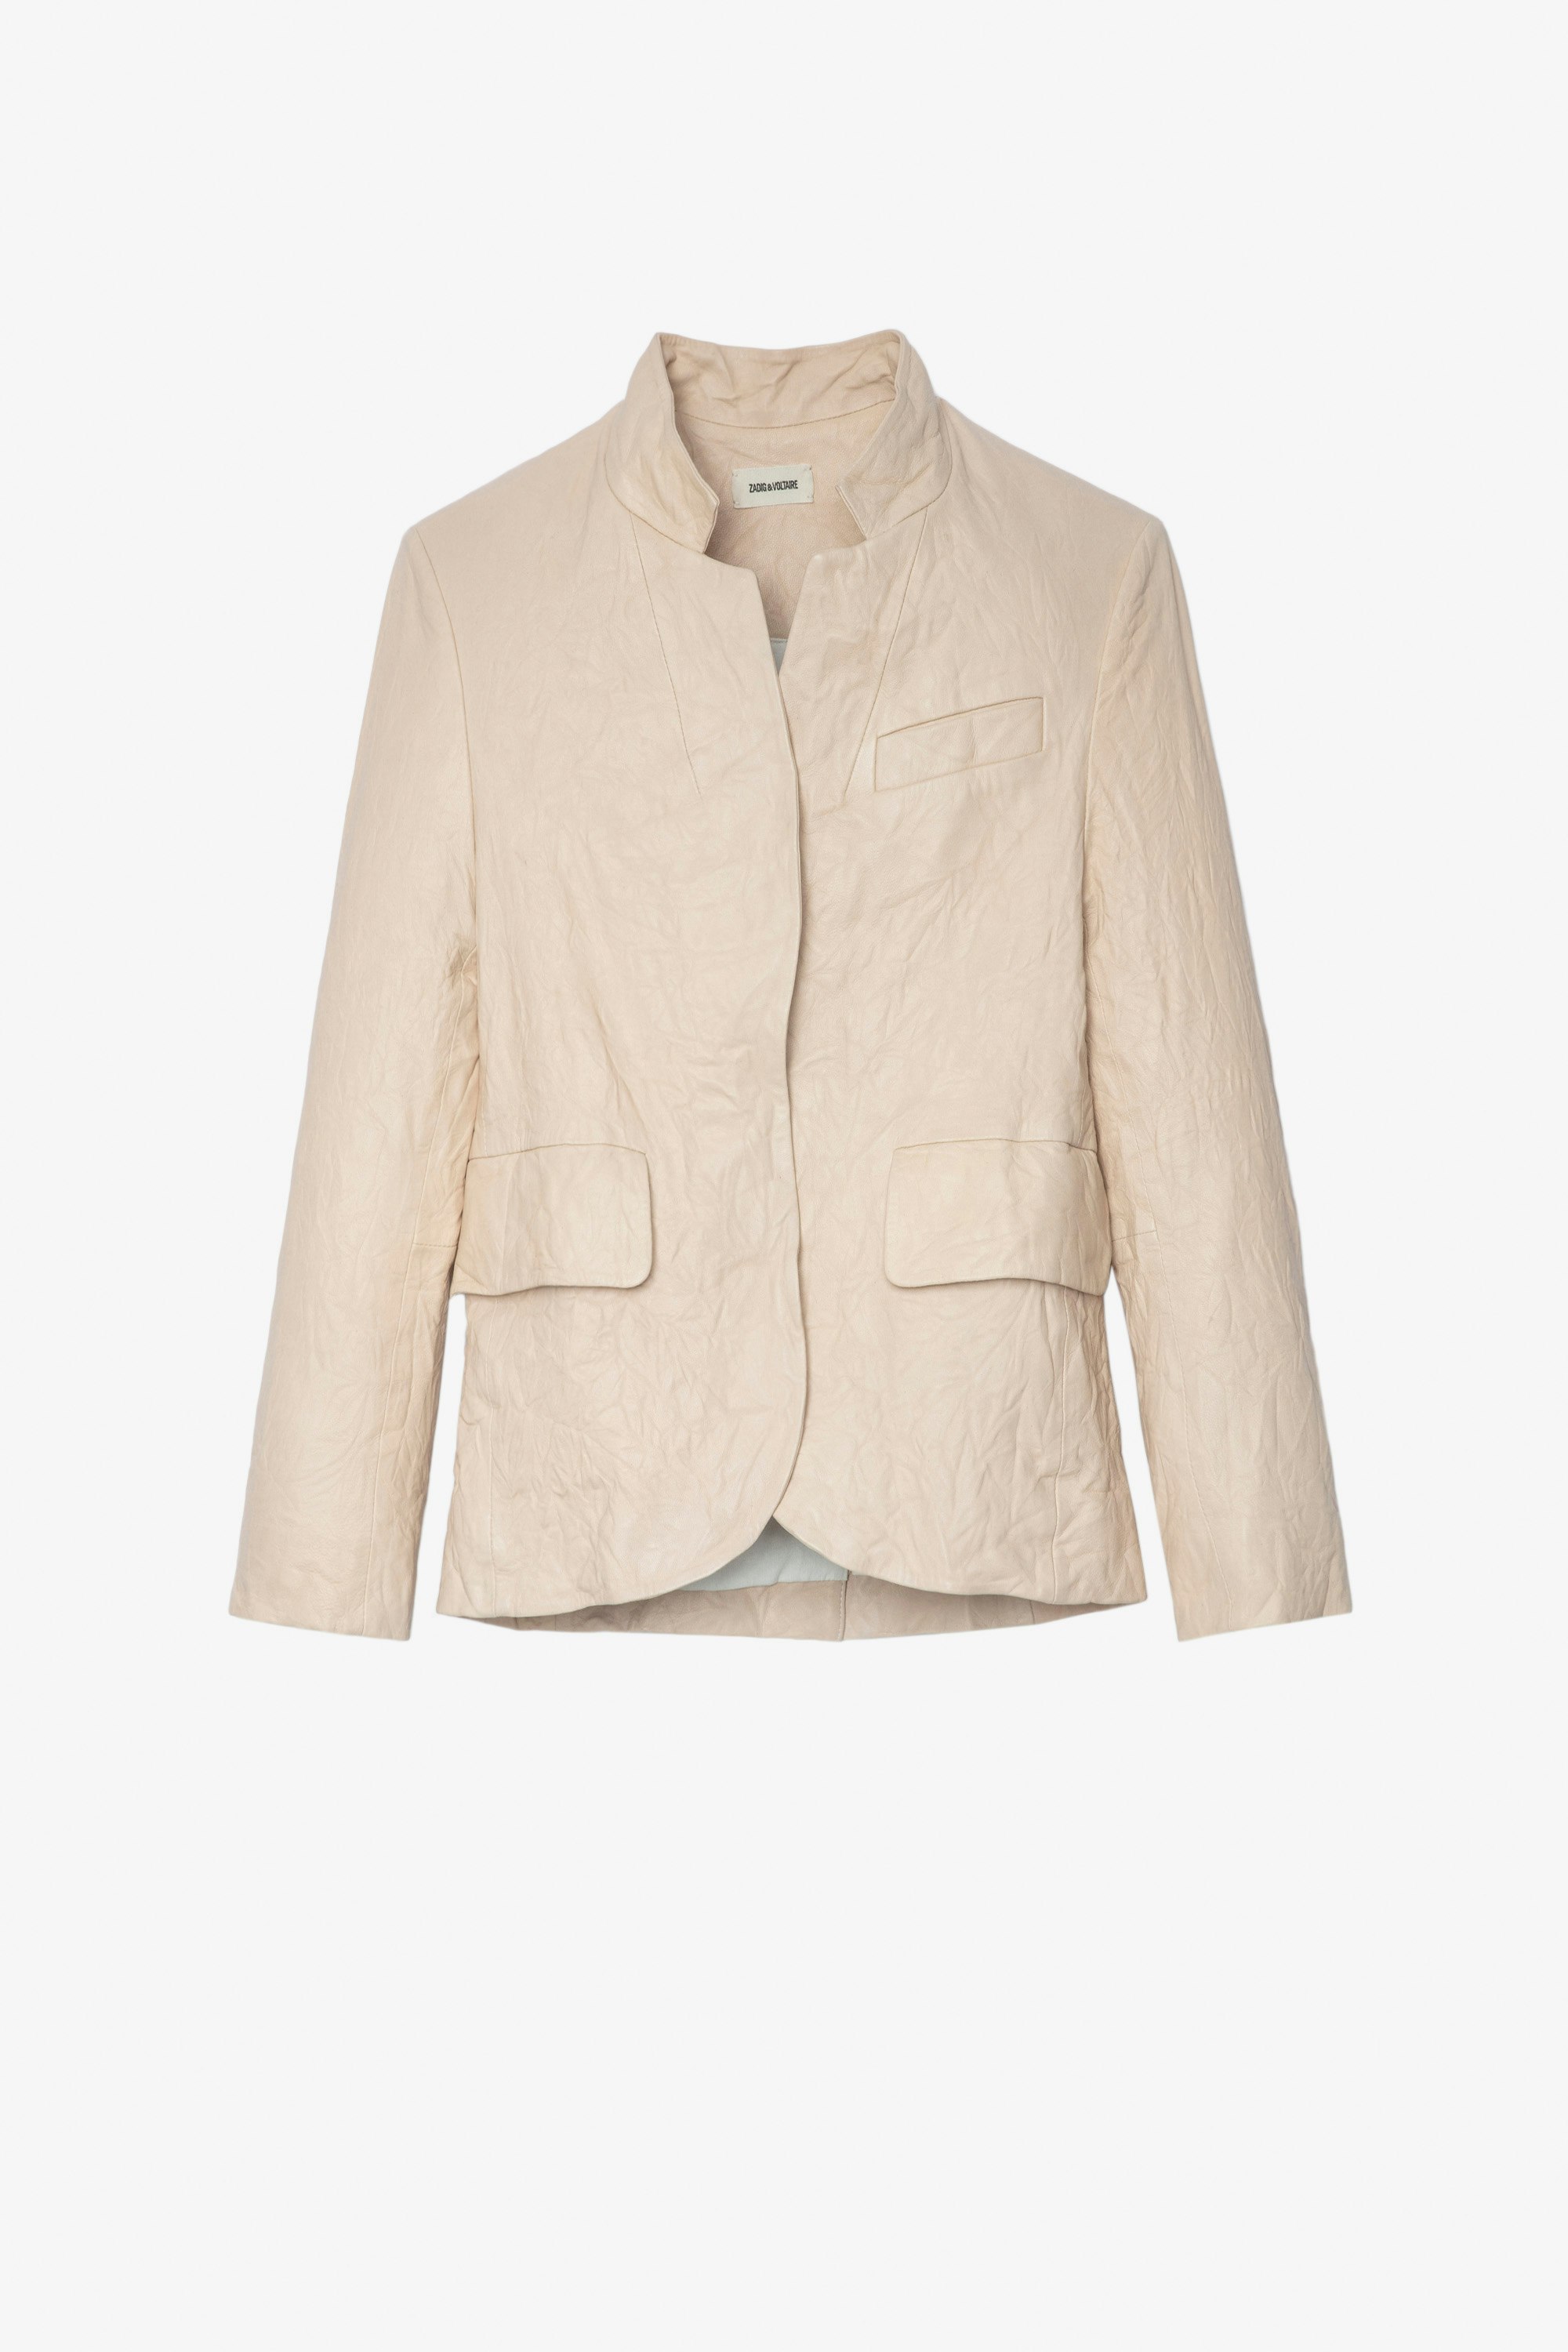 Verys Creased Leather Blazer undefined